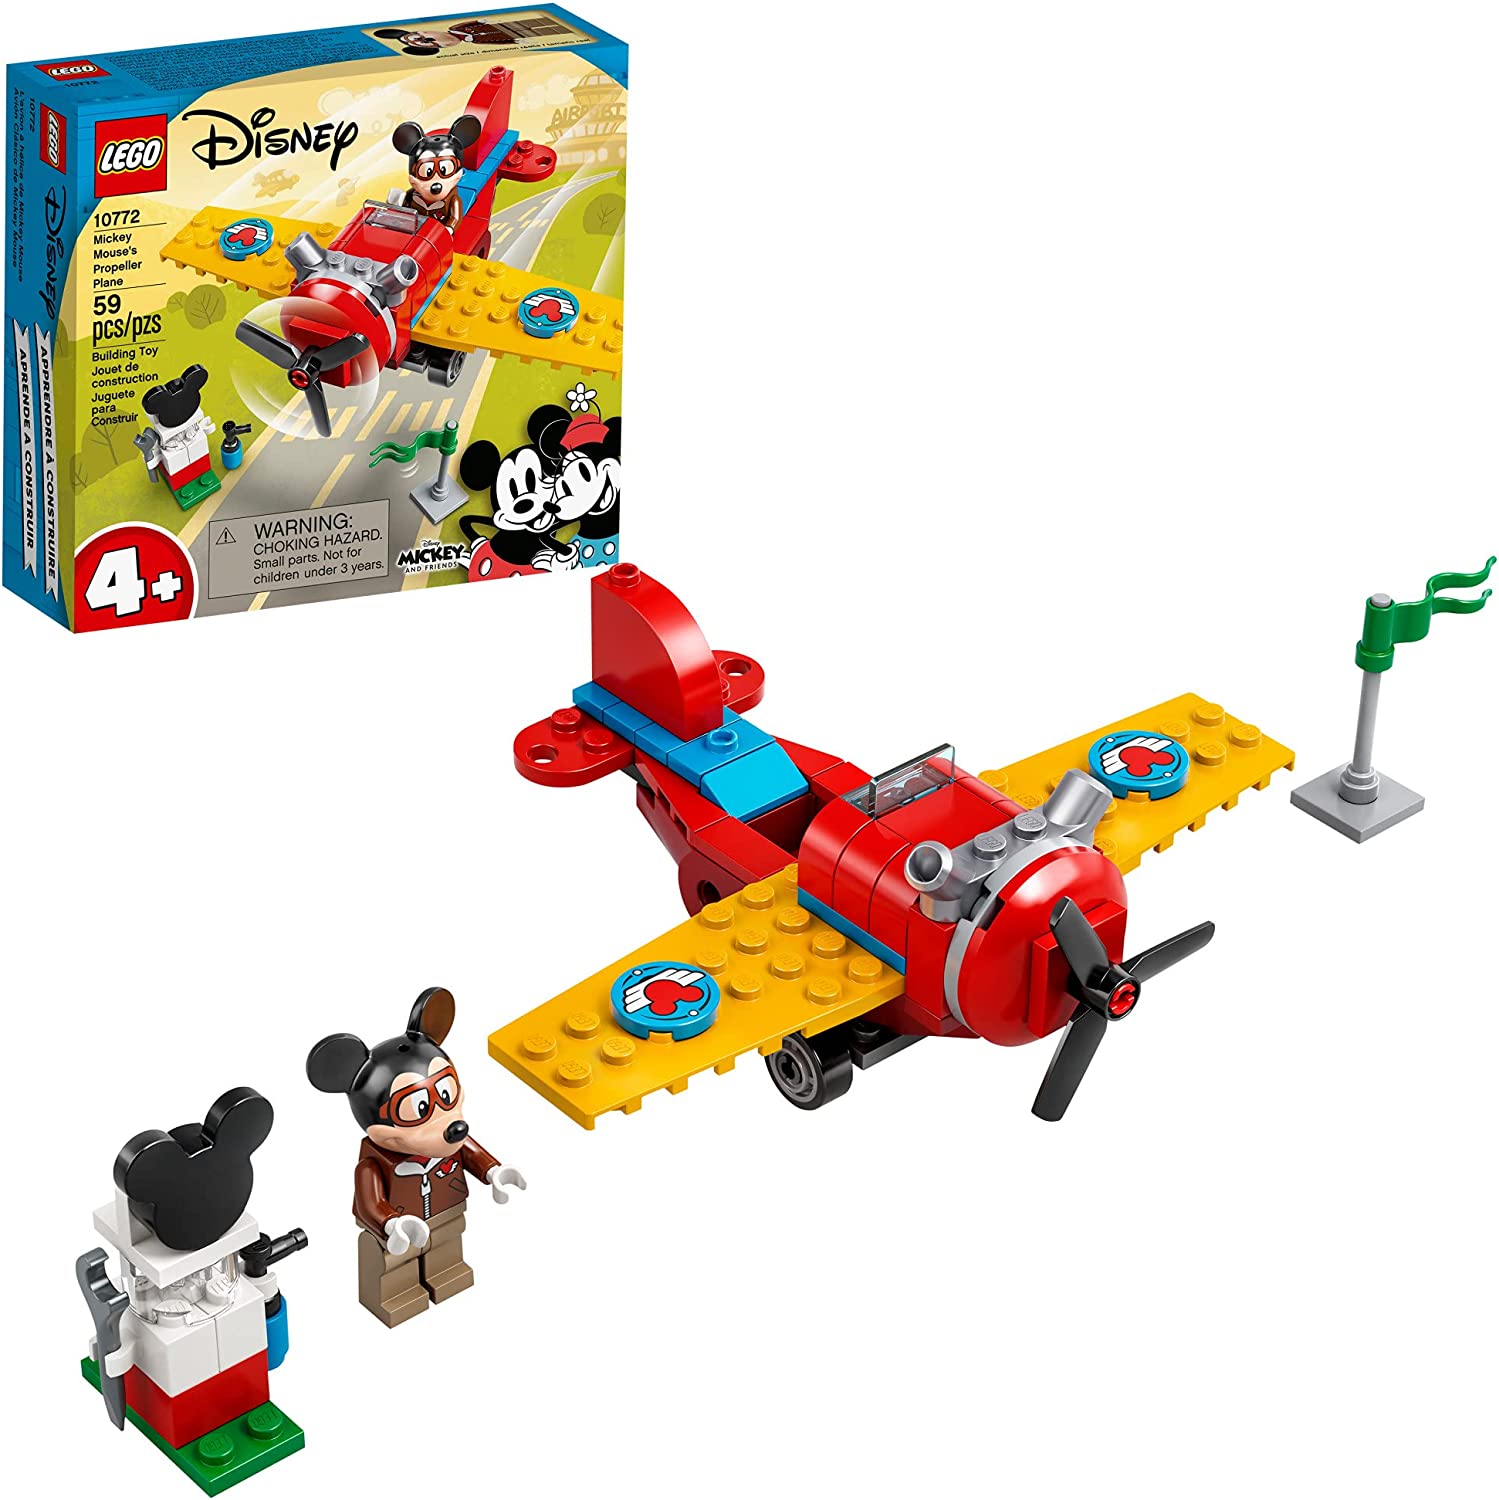 59-Pc LEGO Disney Mickey Mouse's Propeller Plane Building Playset $7 + Free S&H w/ Prime or $25+